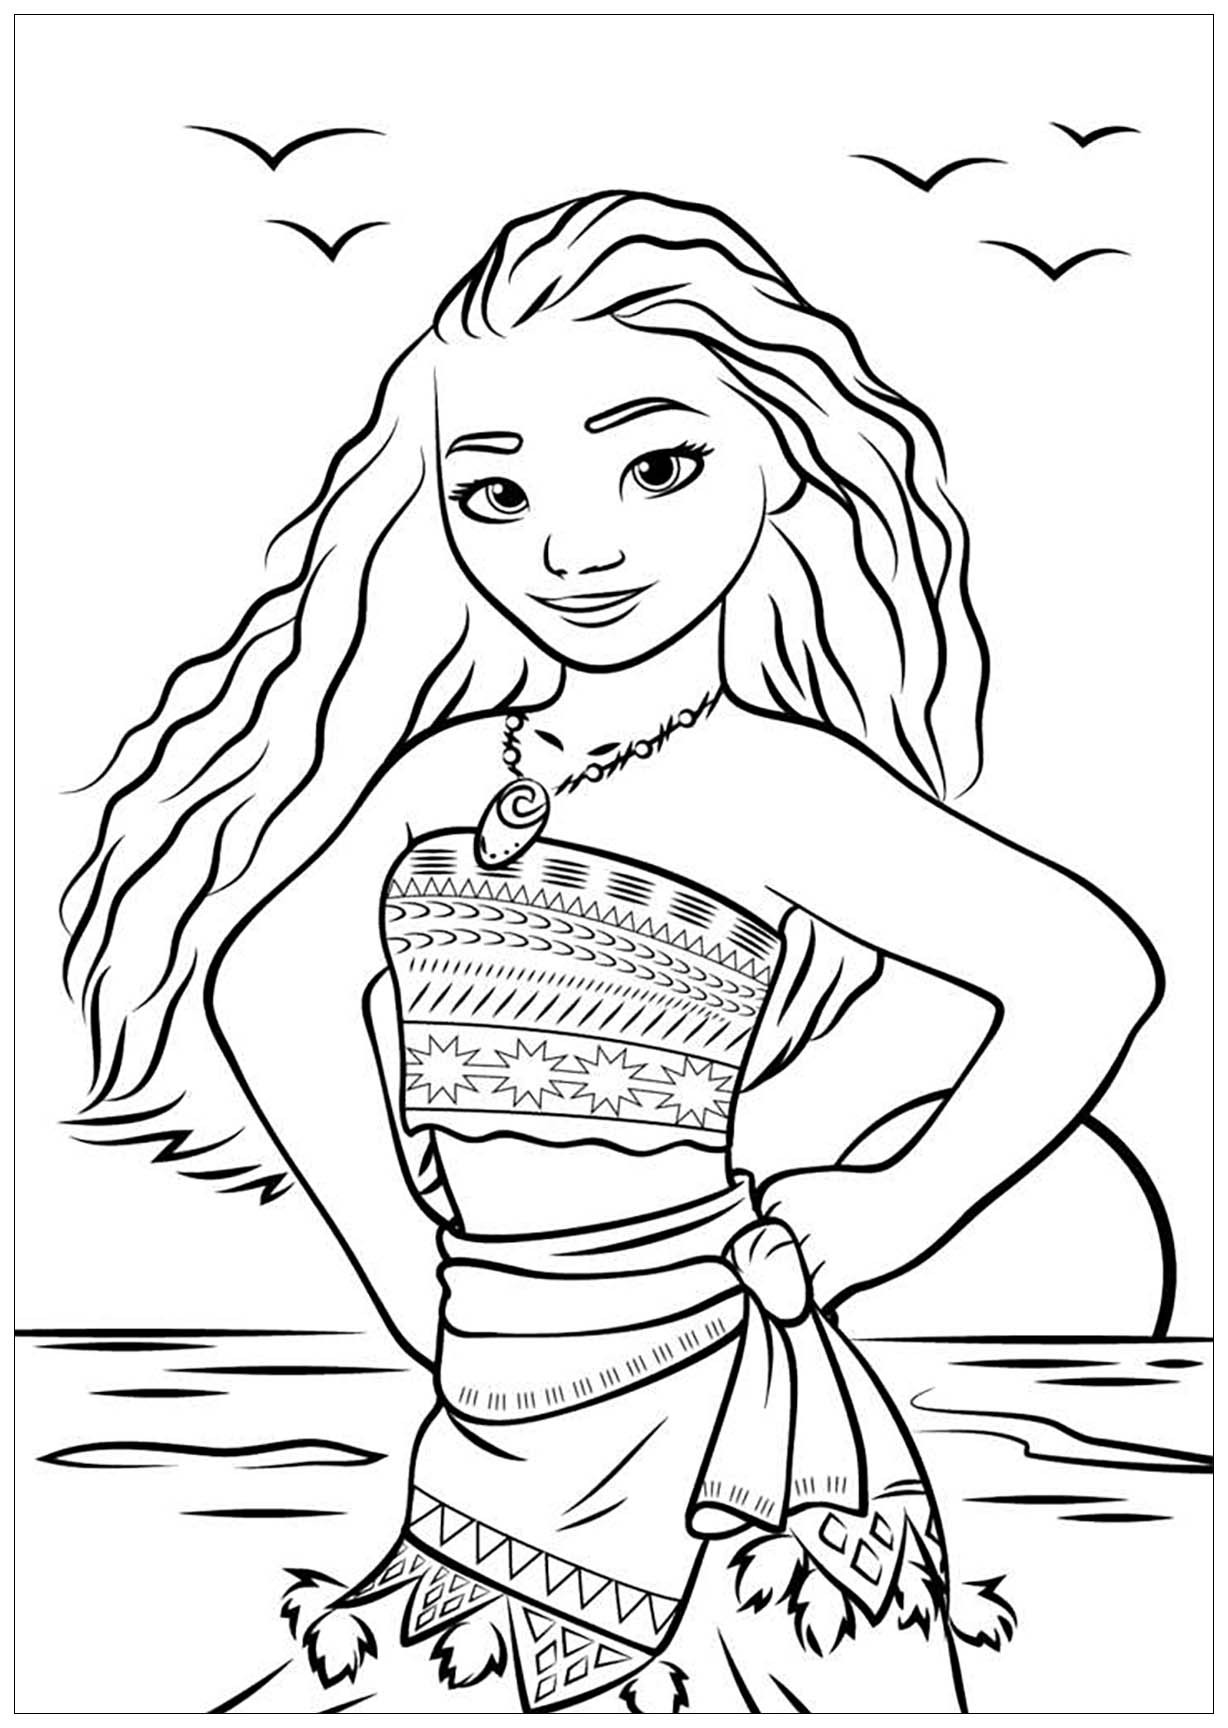 Printable Moana Coloring Pages
 Moana to print for free Moana Kids Coloring Pages